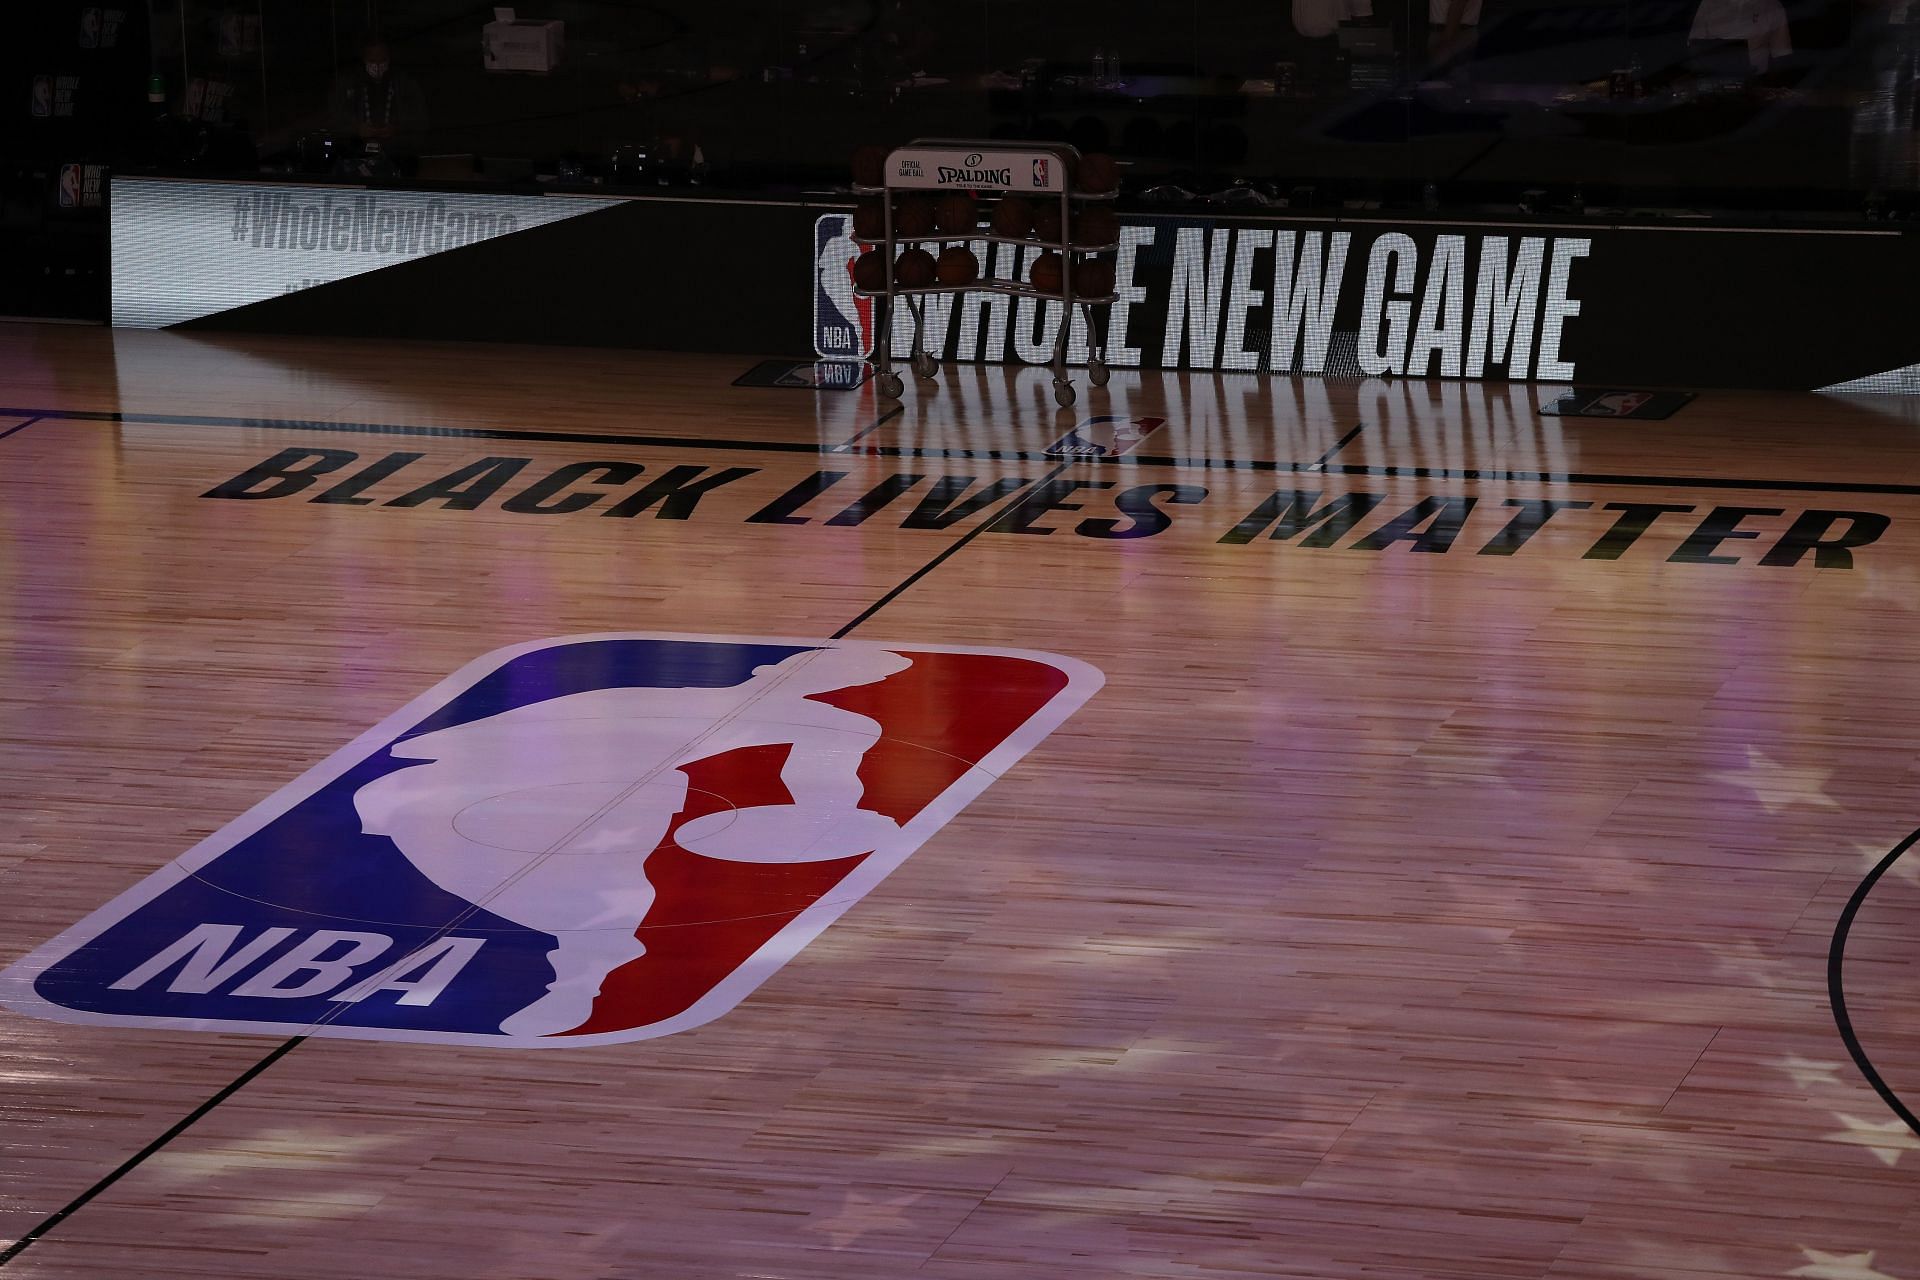 5 prominent NBA teams which were renamed as franchises featuring Los Angeles Lakers, Brooklyn Nets, and more